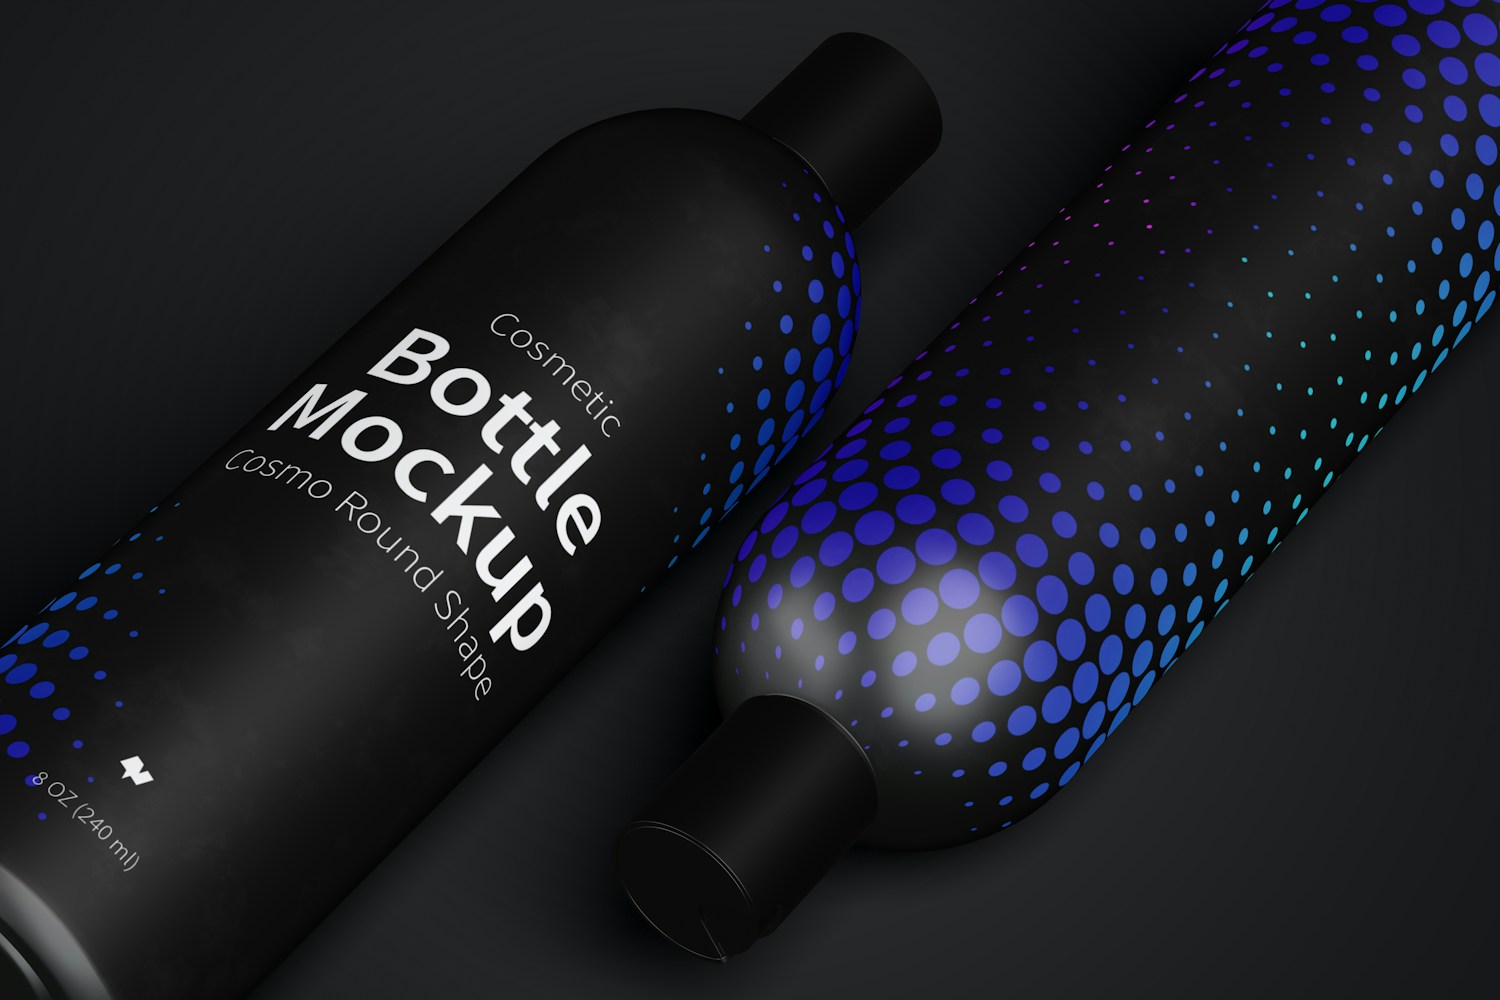 8 oz / 240 ml Cosmo Round Shape Cosmetic Bottles Mockup with Disc Cap, Close-up